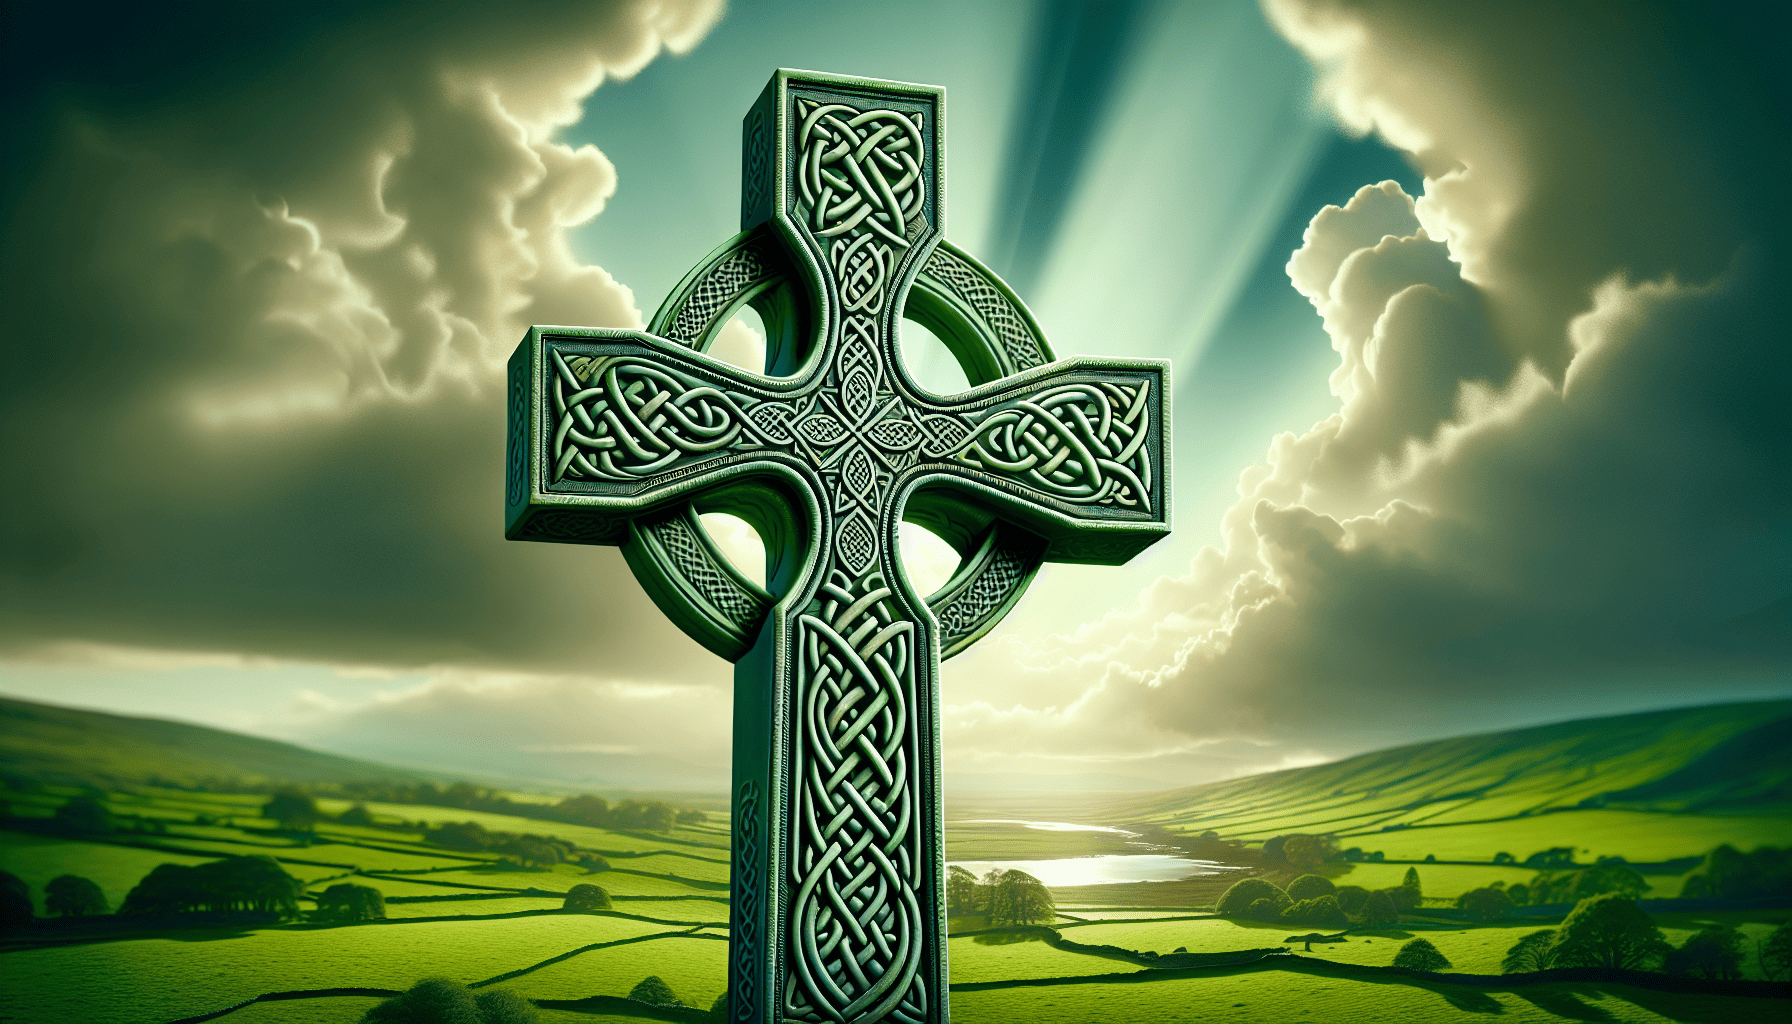 Illustration of a Celtic cross with intricate patterns